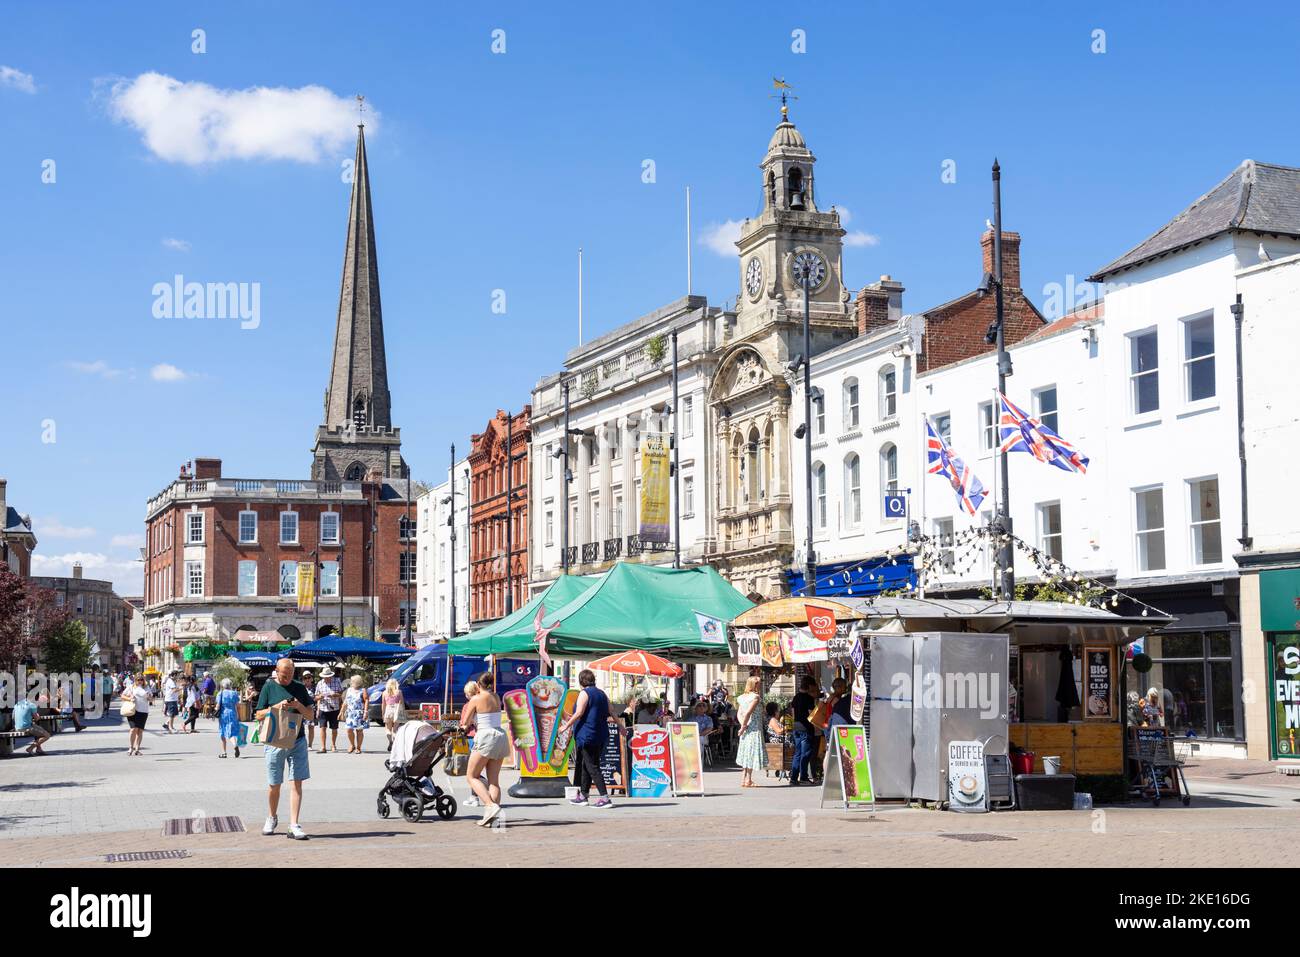 Hereford High Town shopping centre with market stalls and My Coffee corner cafe in the Market Square Hereford Herefordshire England UK GB Europe Stock Photo